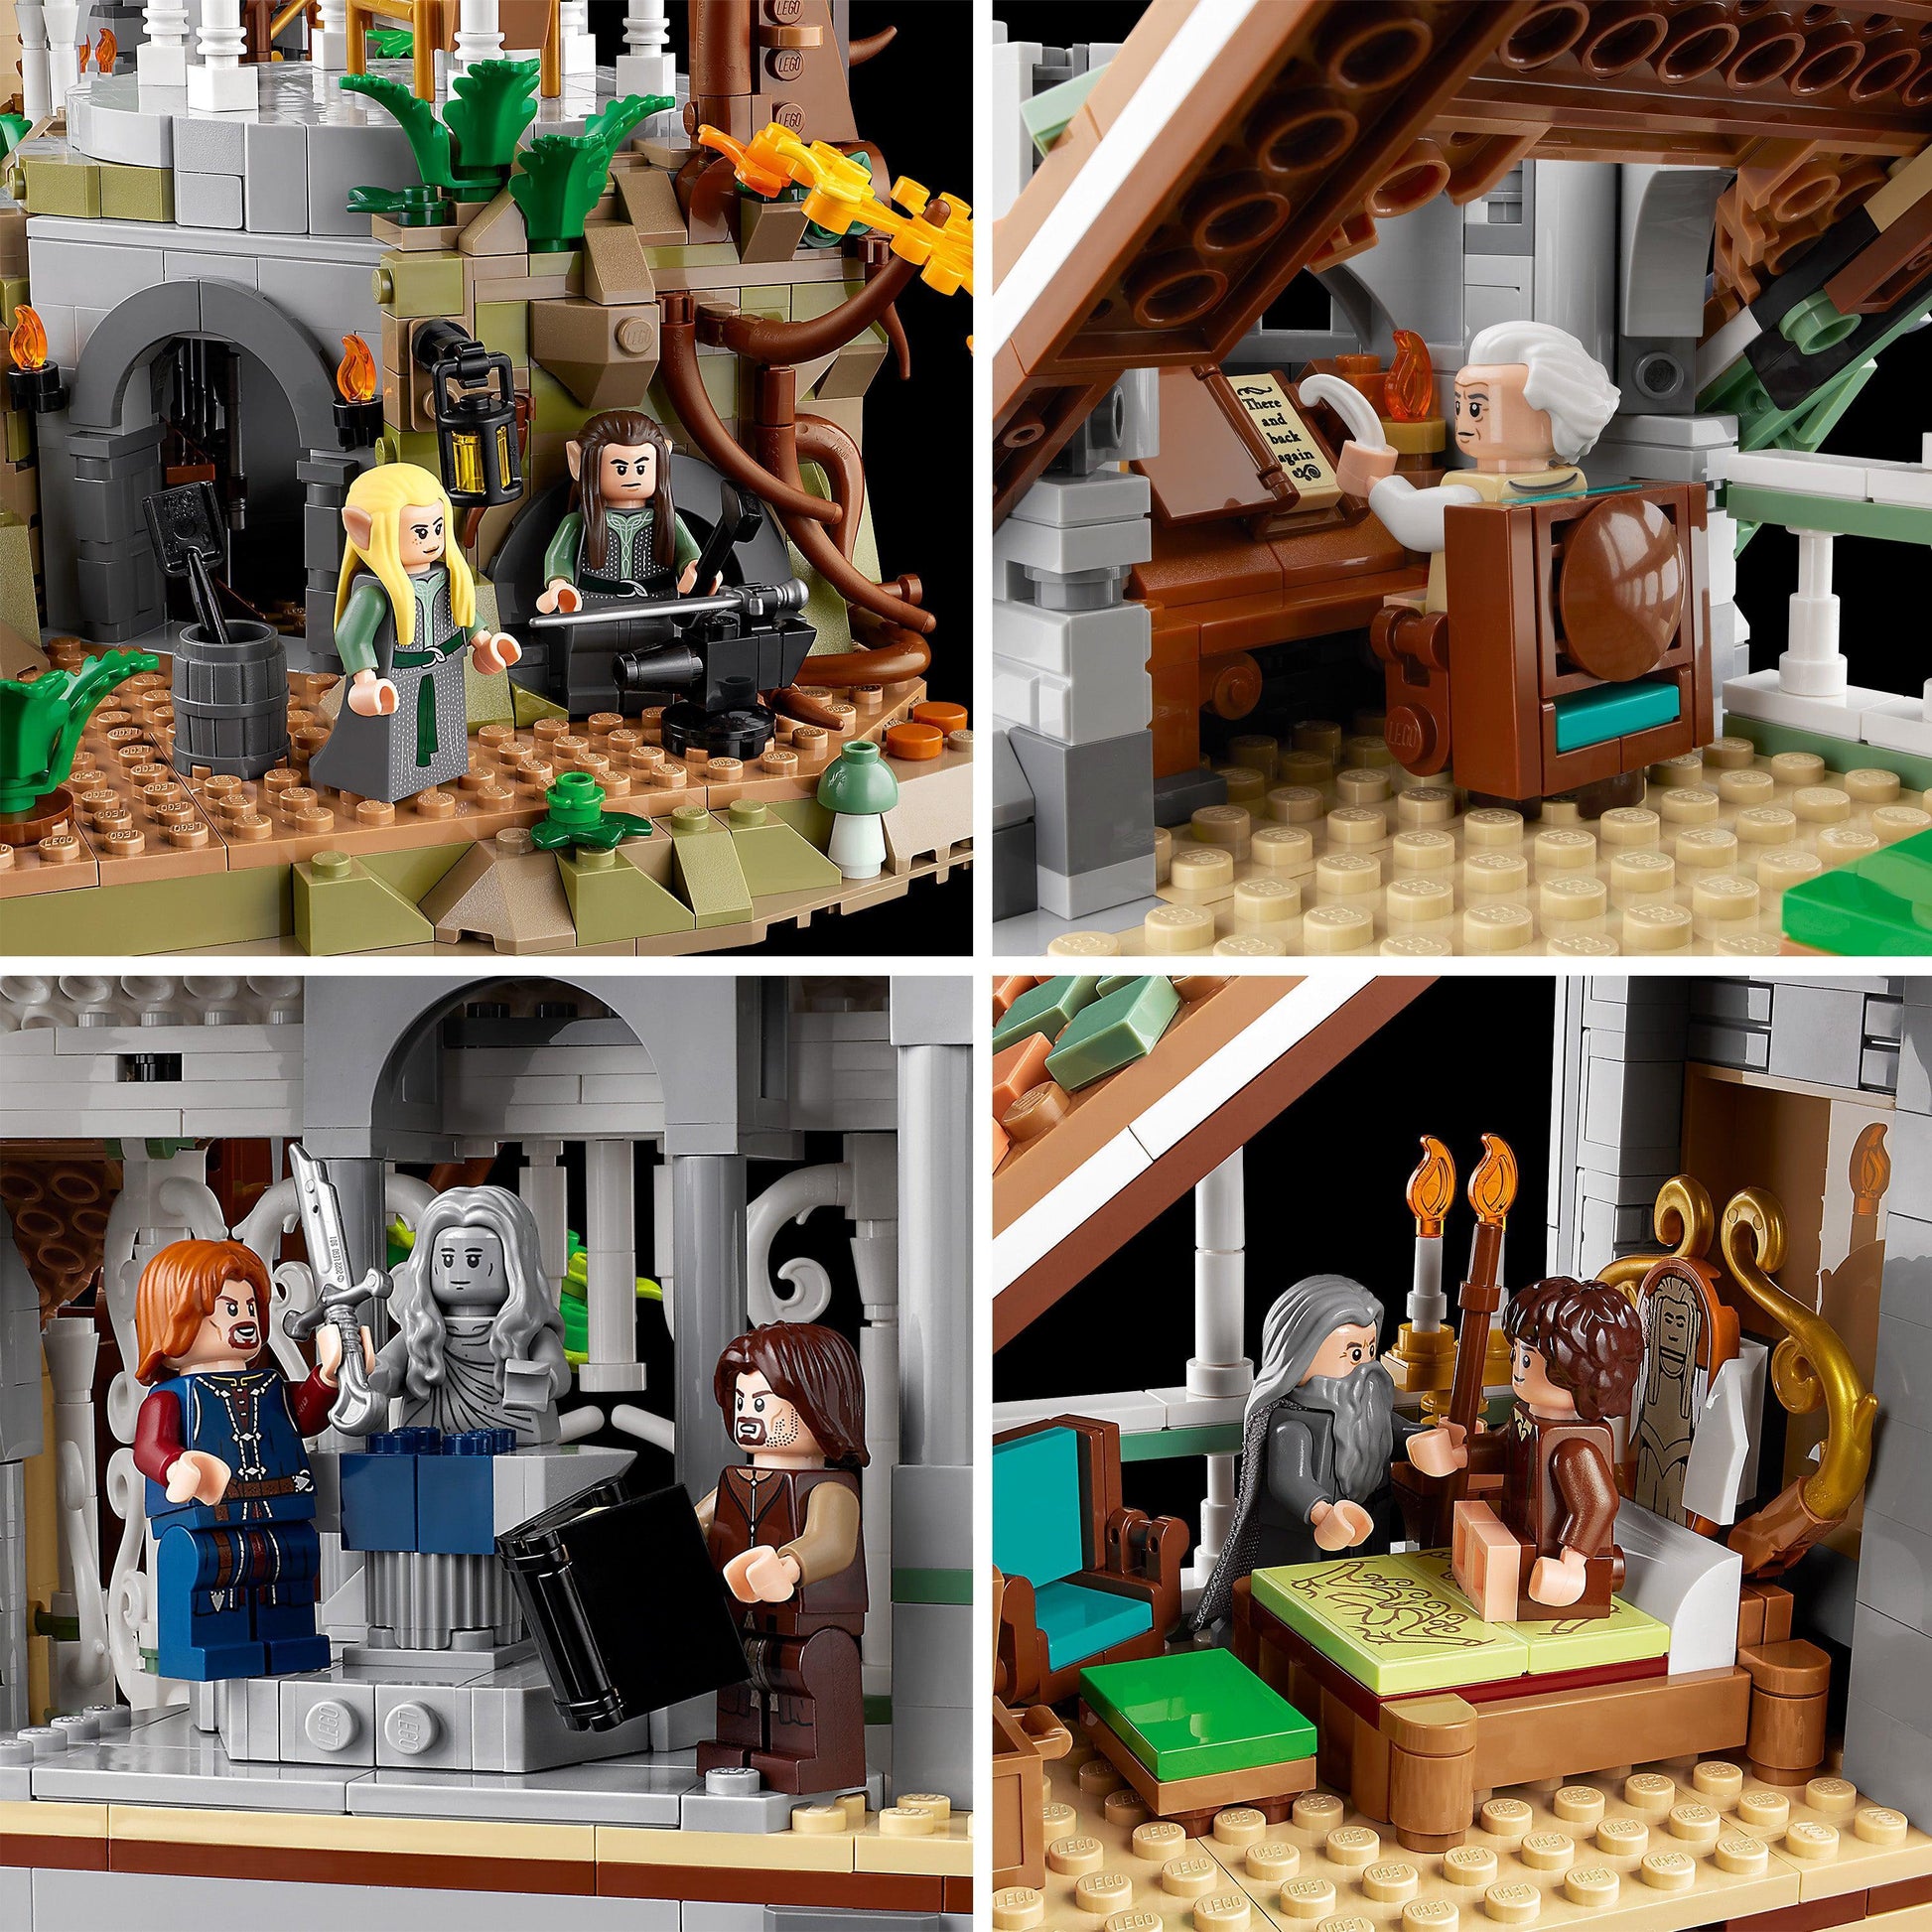 LEGO Rivendell™ 10316 The Lord Of The Rings | 2TTOYS ✓ Official shop<br>